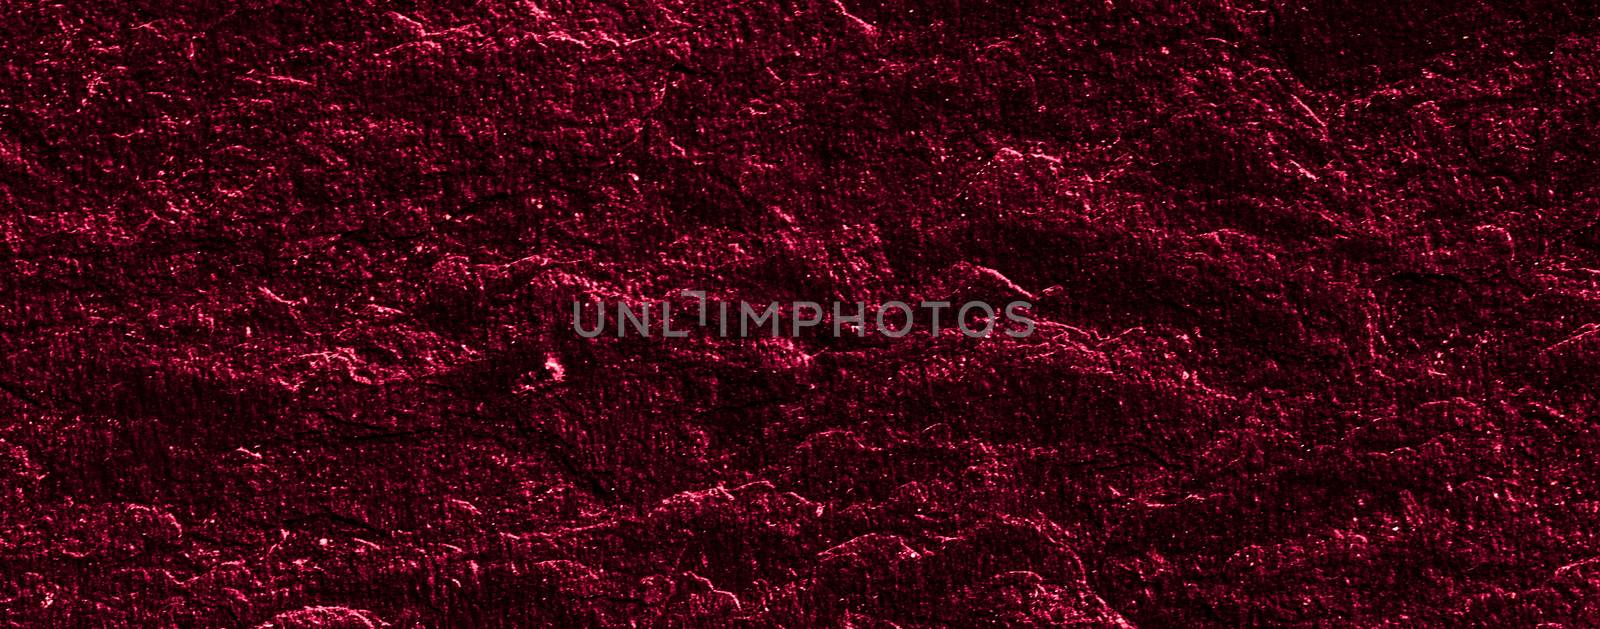 Red stone texture as abstract background, design material and textured surfaces